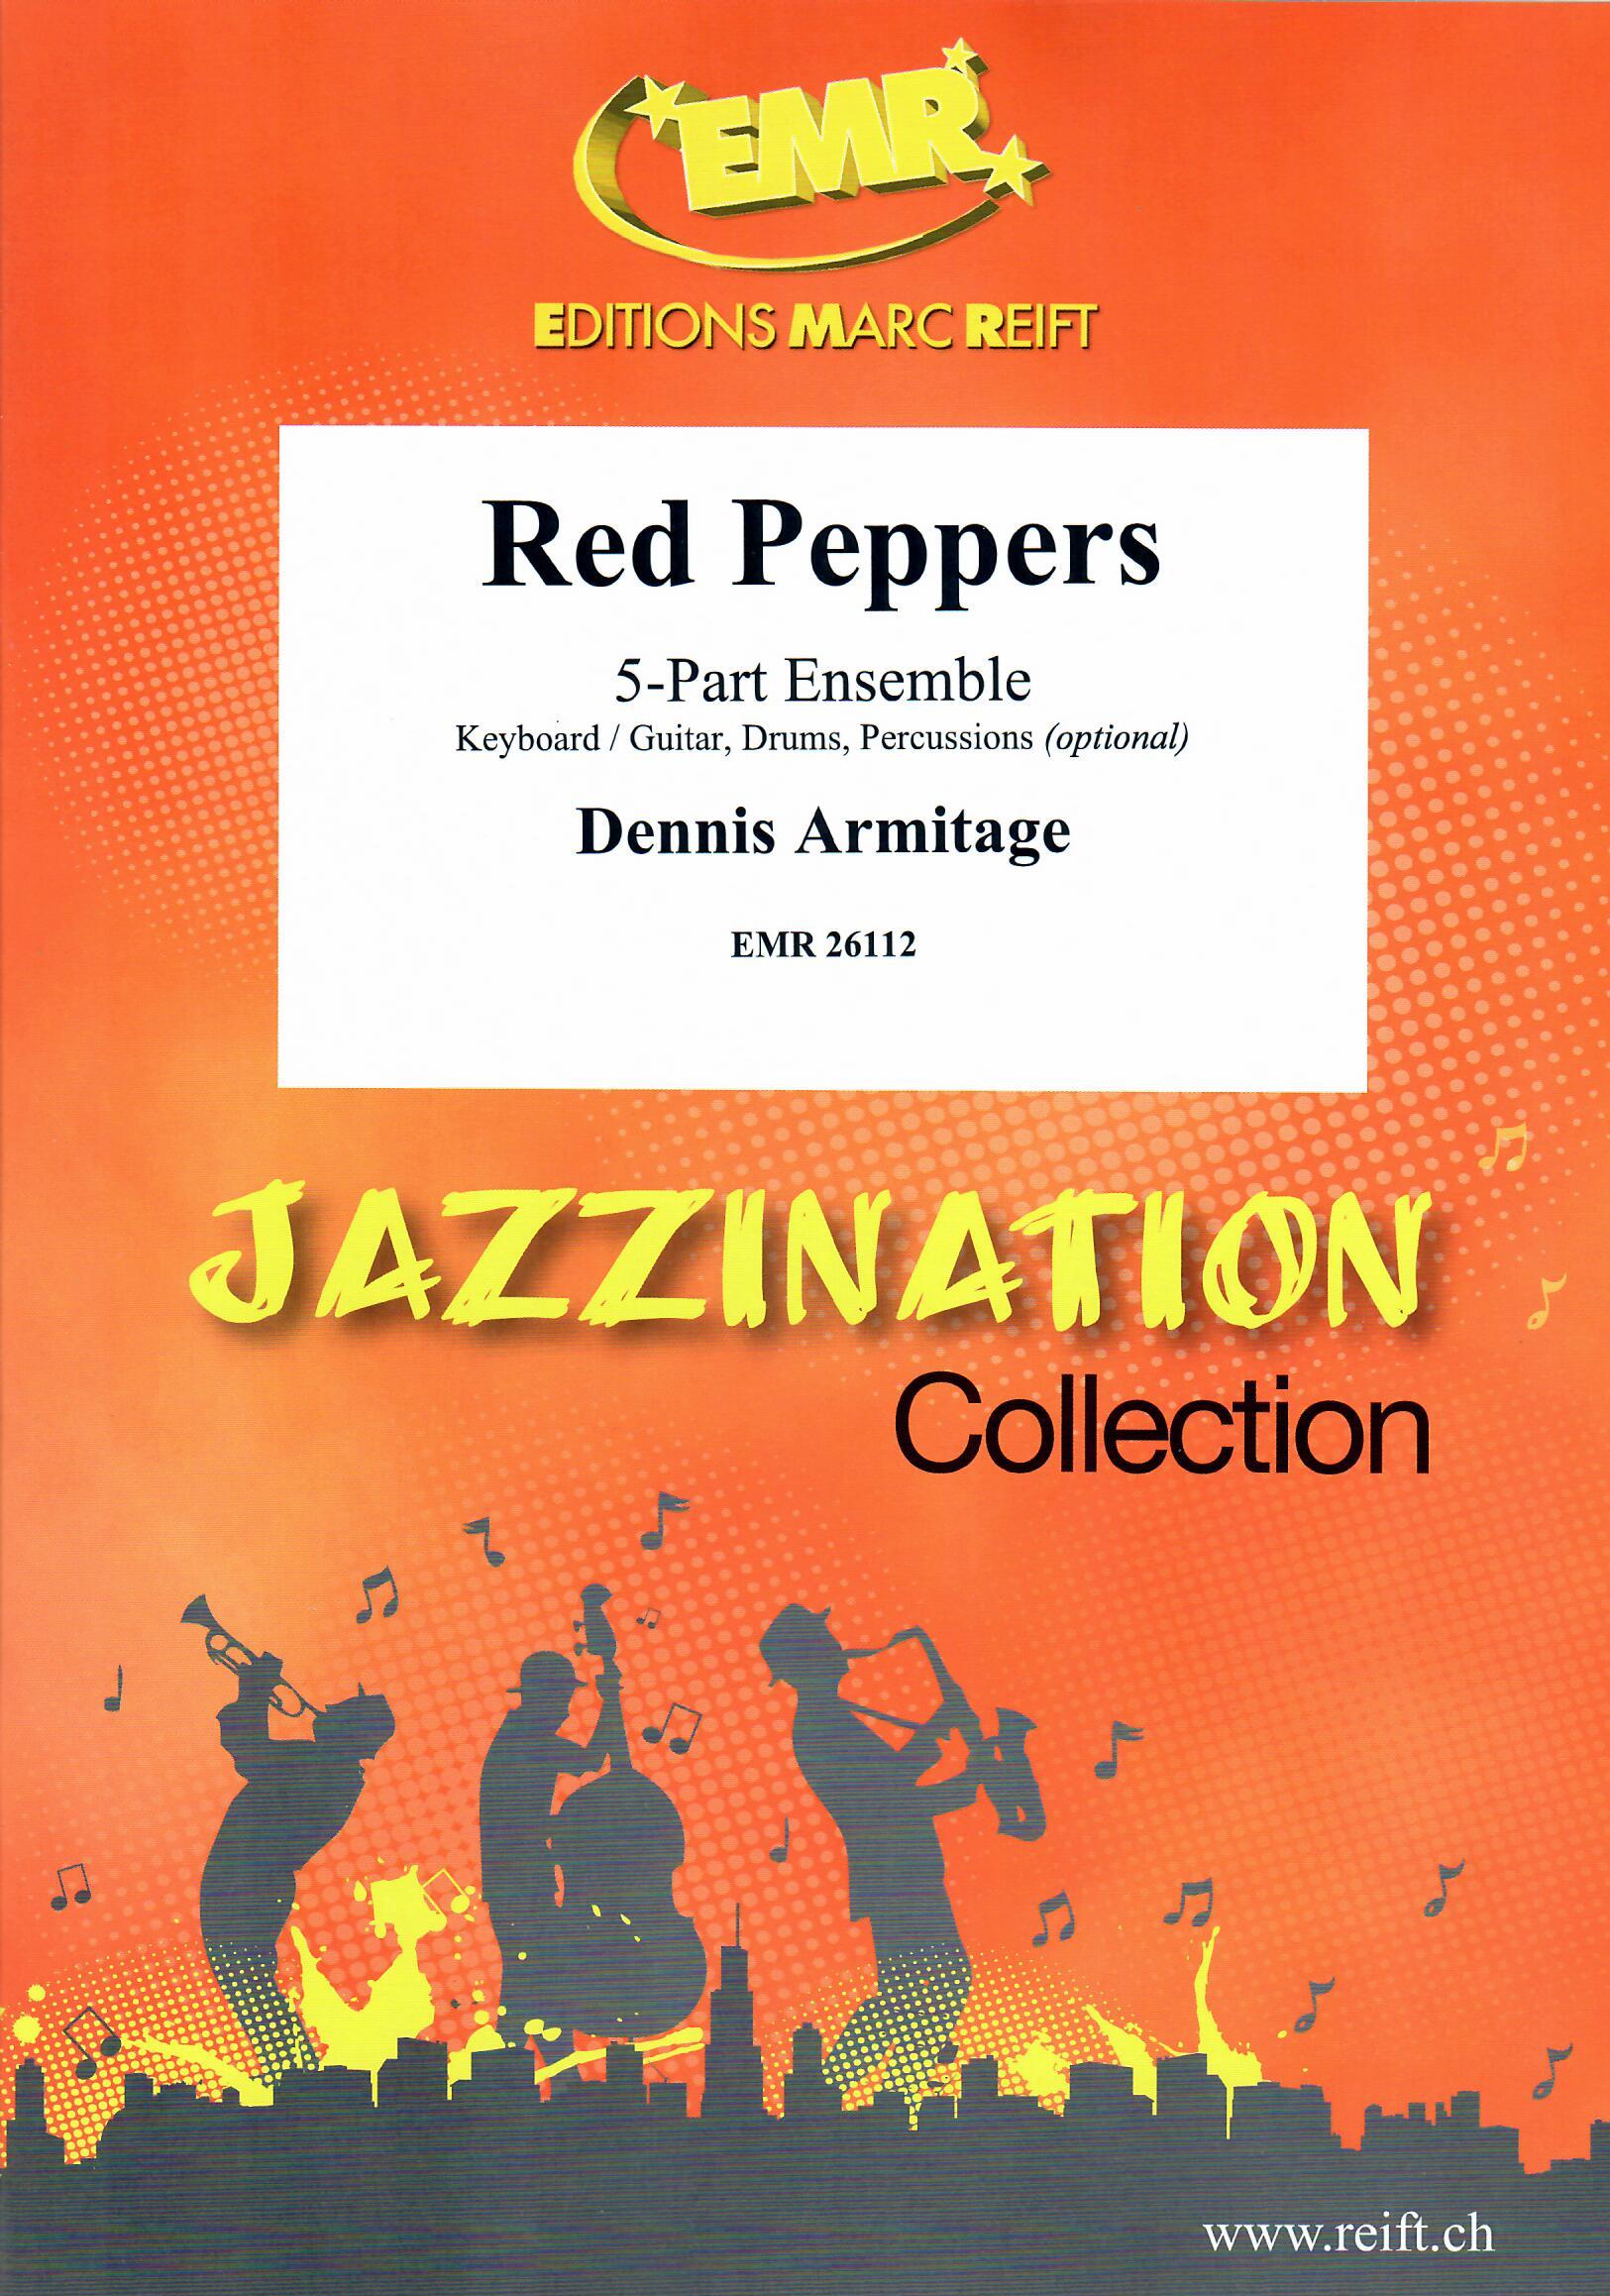 RED PEPPERS, EMR Flexi - Band